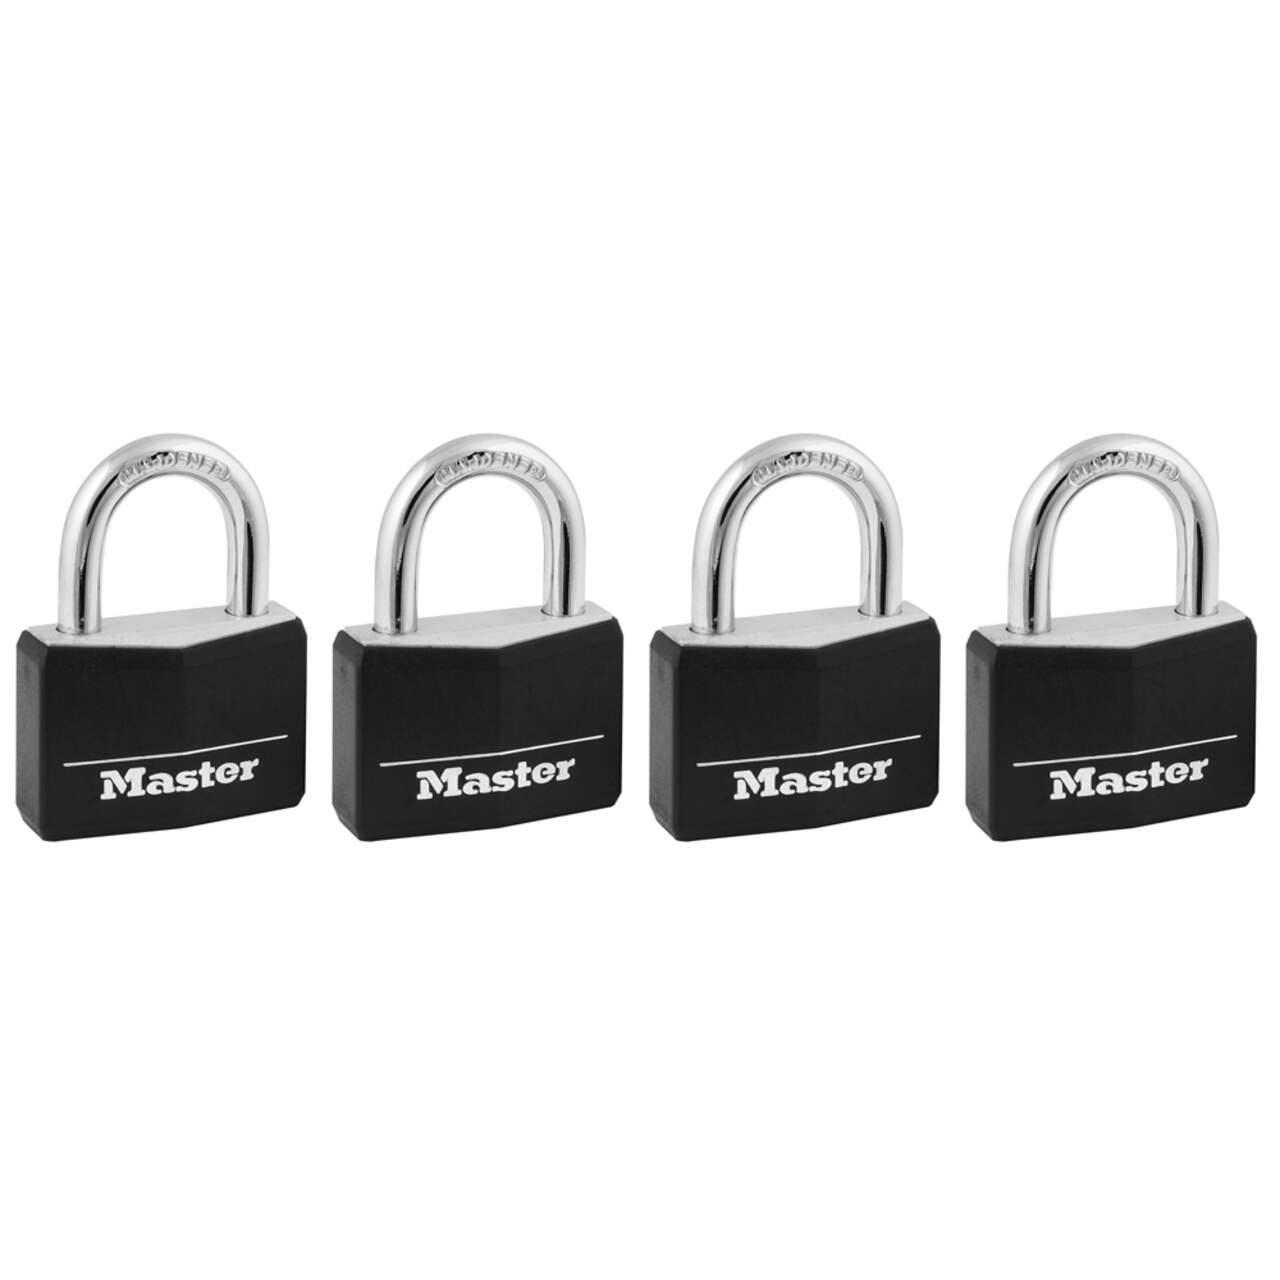 https://media-www.canadiantire.ca/product/fixing/hardware/curb-appeal/0461237/masterlock-padlock-keyed-alike-40mm-4pk-500c6cf9-2e14-42e5-b0f2-5c9e943ab32e.png?imdensity=1&imwidth=640&impolicy=mZoom